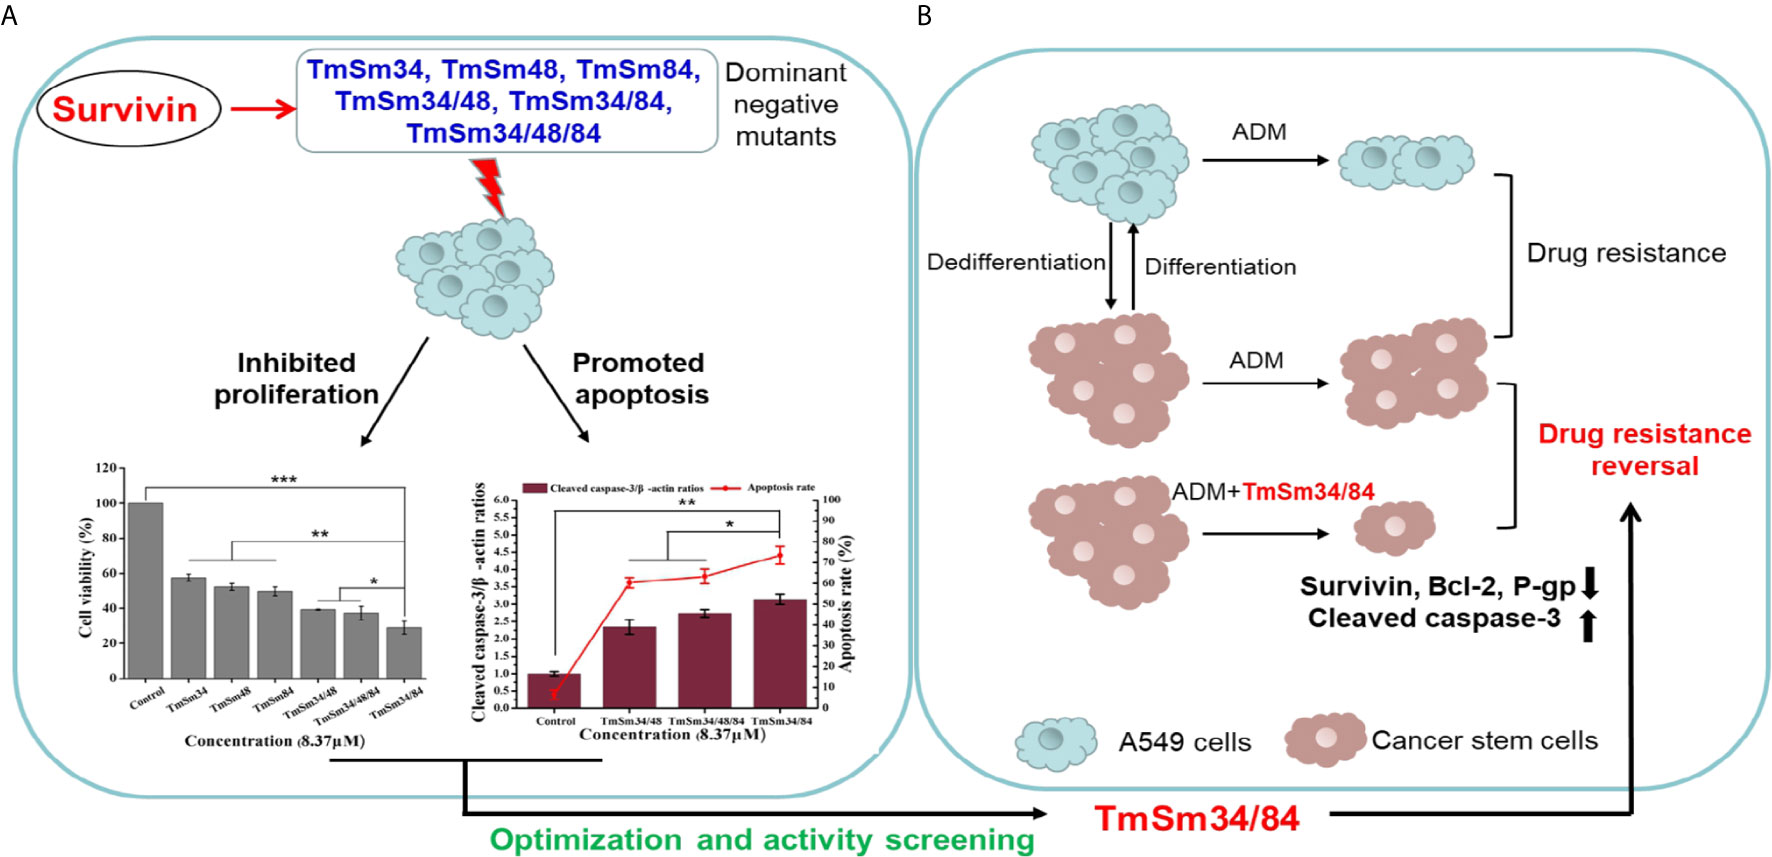 Frontiers Discovering And Characterizing Of Survivin Dominant Negative Mutants With Stronger Pro Apoptotic Activity On Cancer Cells And Cscs Oncology